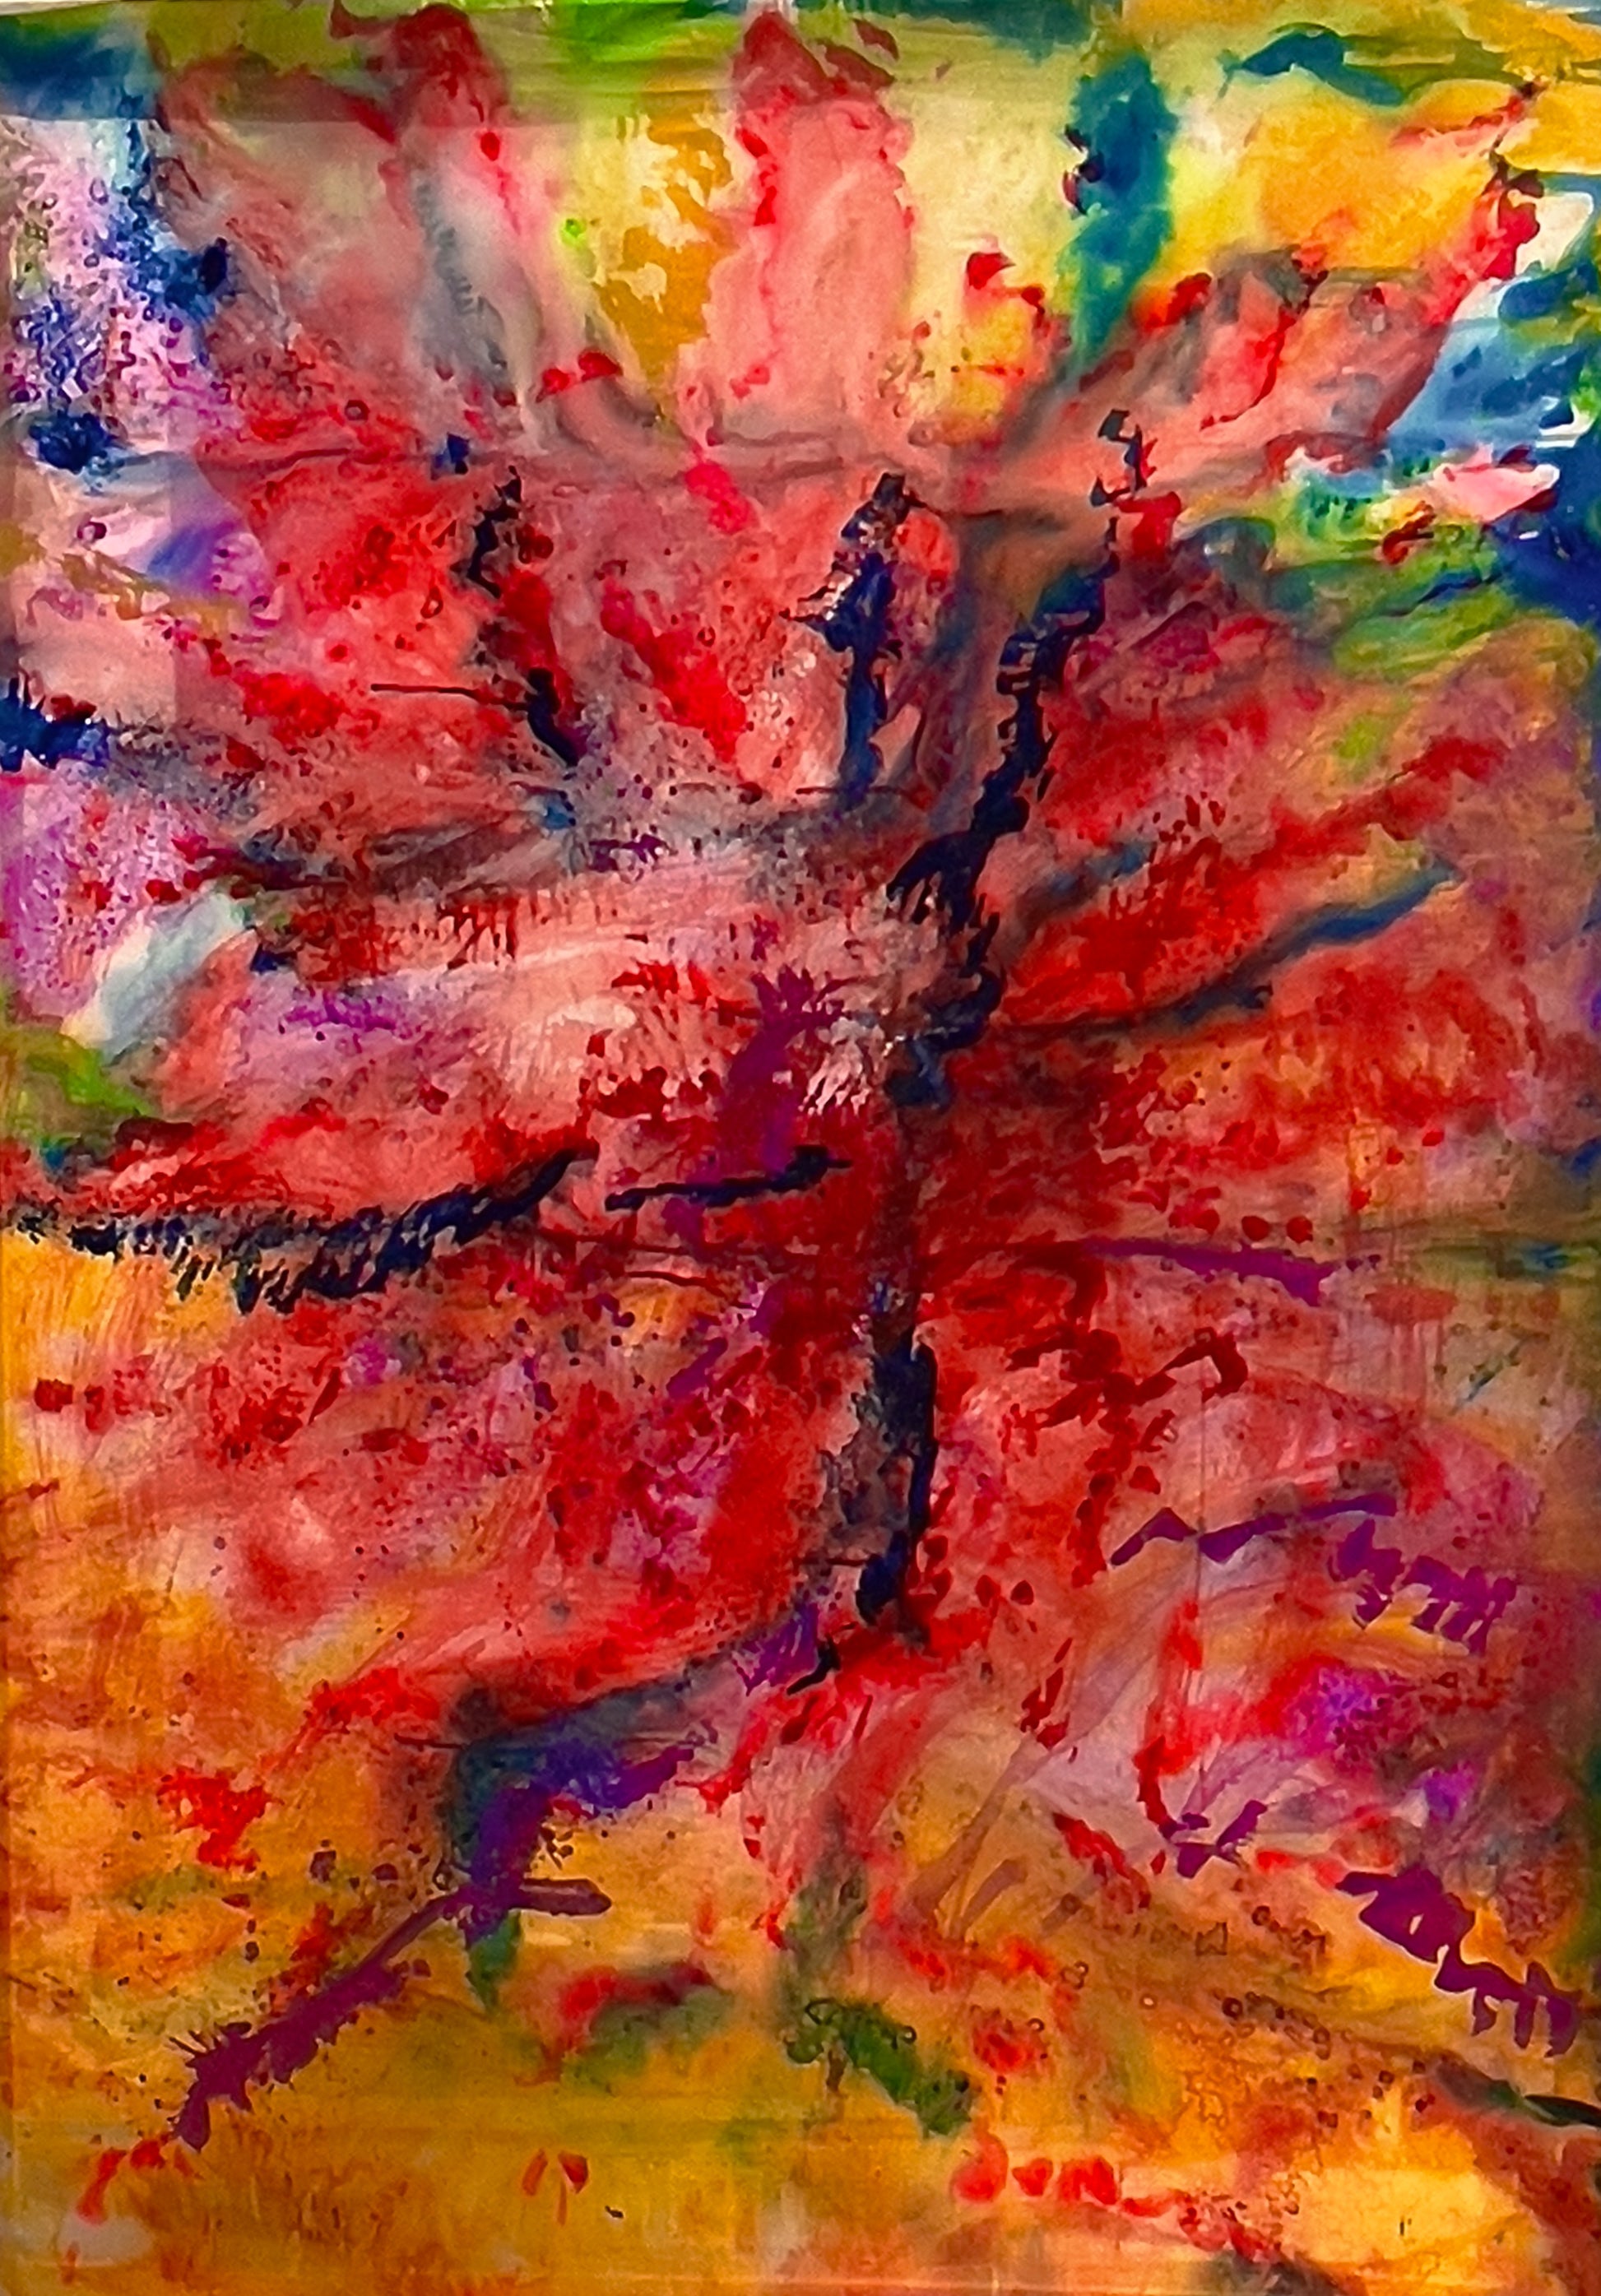 The Beautiful and Bold colors of this Ink on Silk painting create a romantic atmosphere in any room while maintaining a sophisticated and modern look. The Beautiful and Bold is an Ink on Silk painting by Shahla Rahimi Reynolds. It is 55” H x 481/2” W.